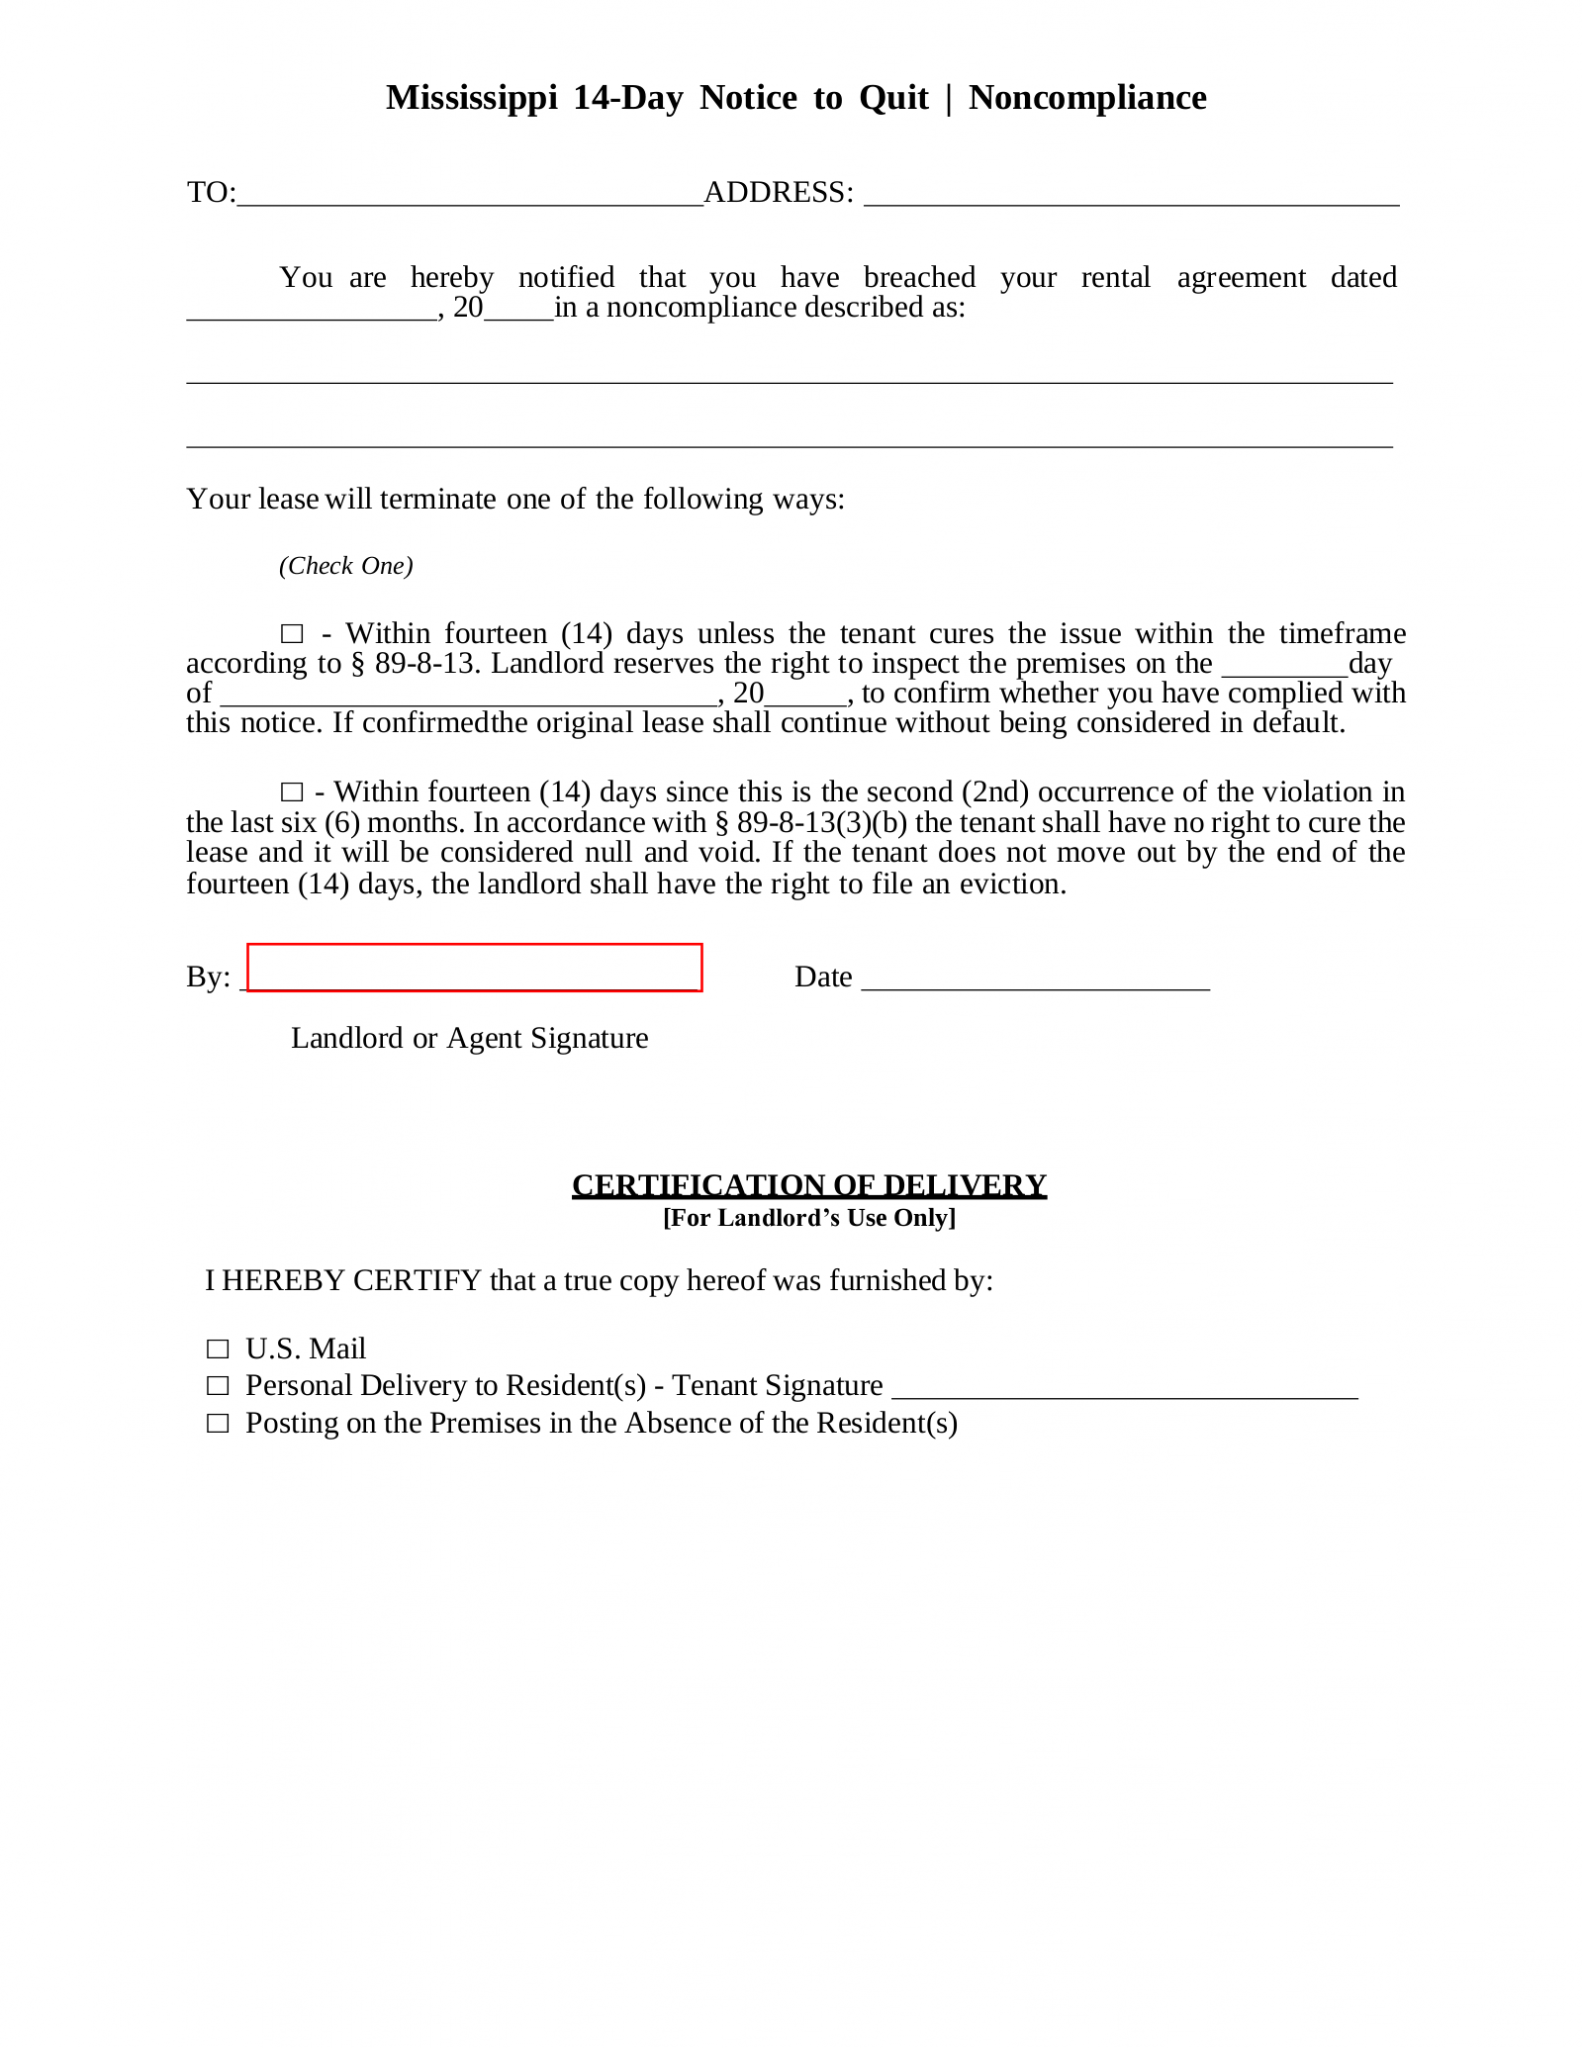 free-mississippi-14-day-notice-to-quit-form-non-compliance-pdf-eforms